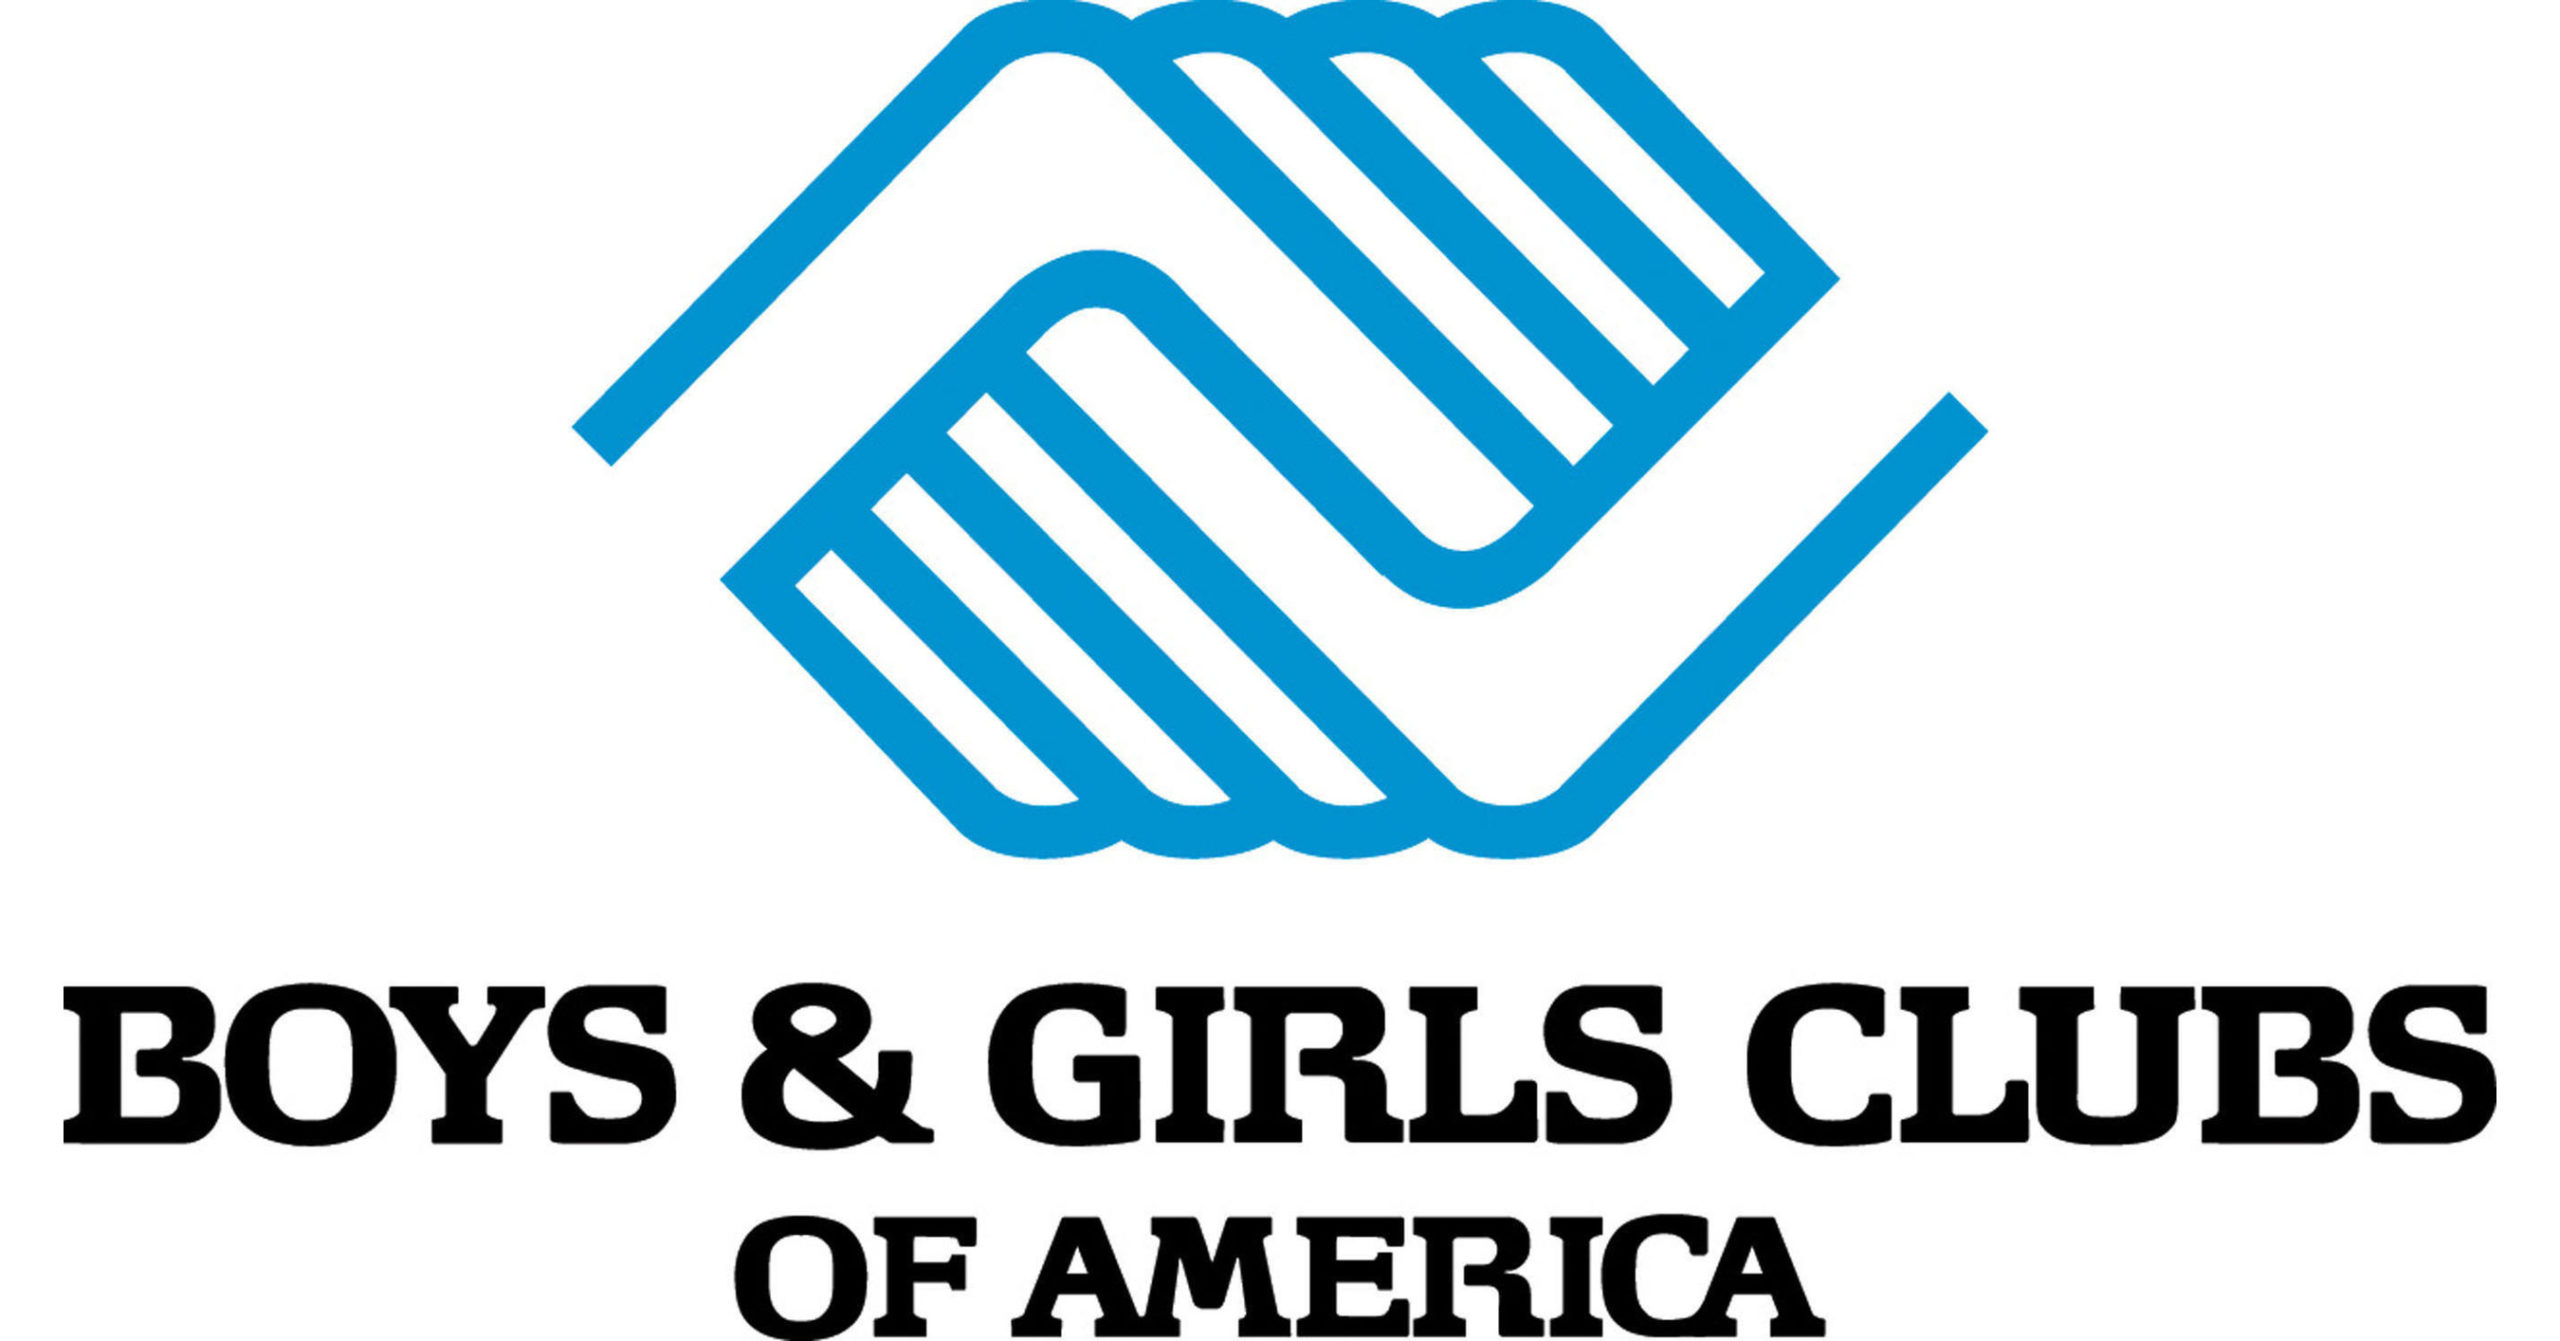 Boys & Girls Club Award Recognizes Inspiring Young People Nationwide